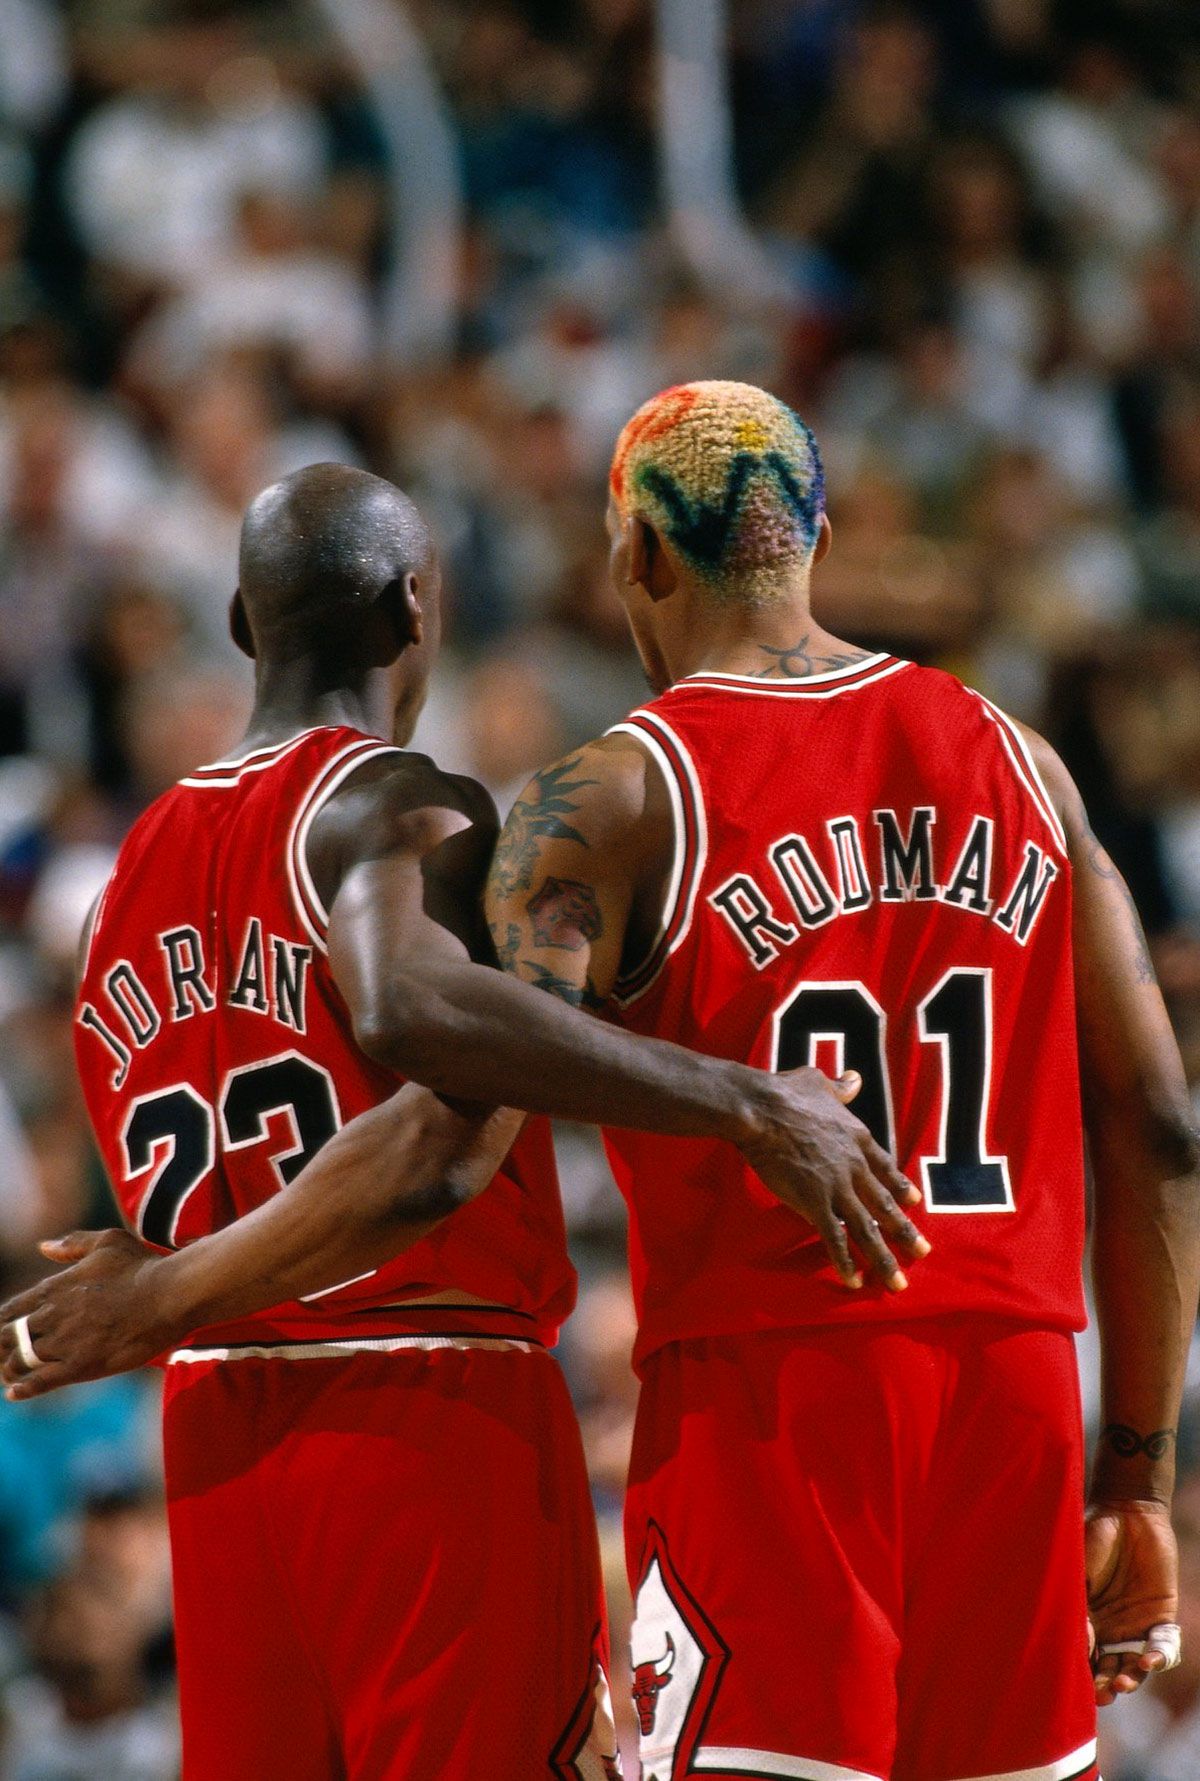 Dennis Rodman's stats: Taking a closer look at The Worm's insane